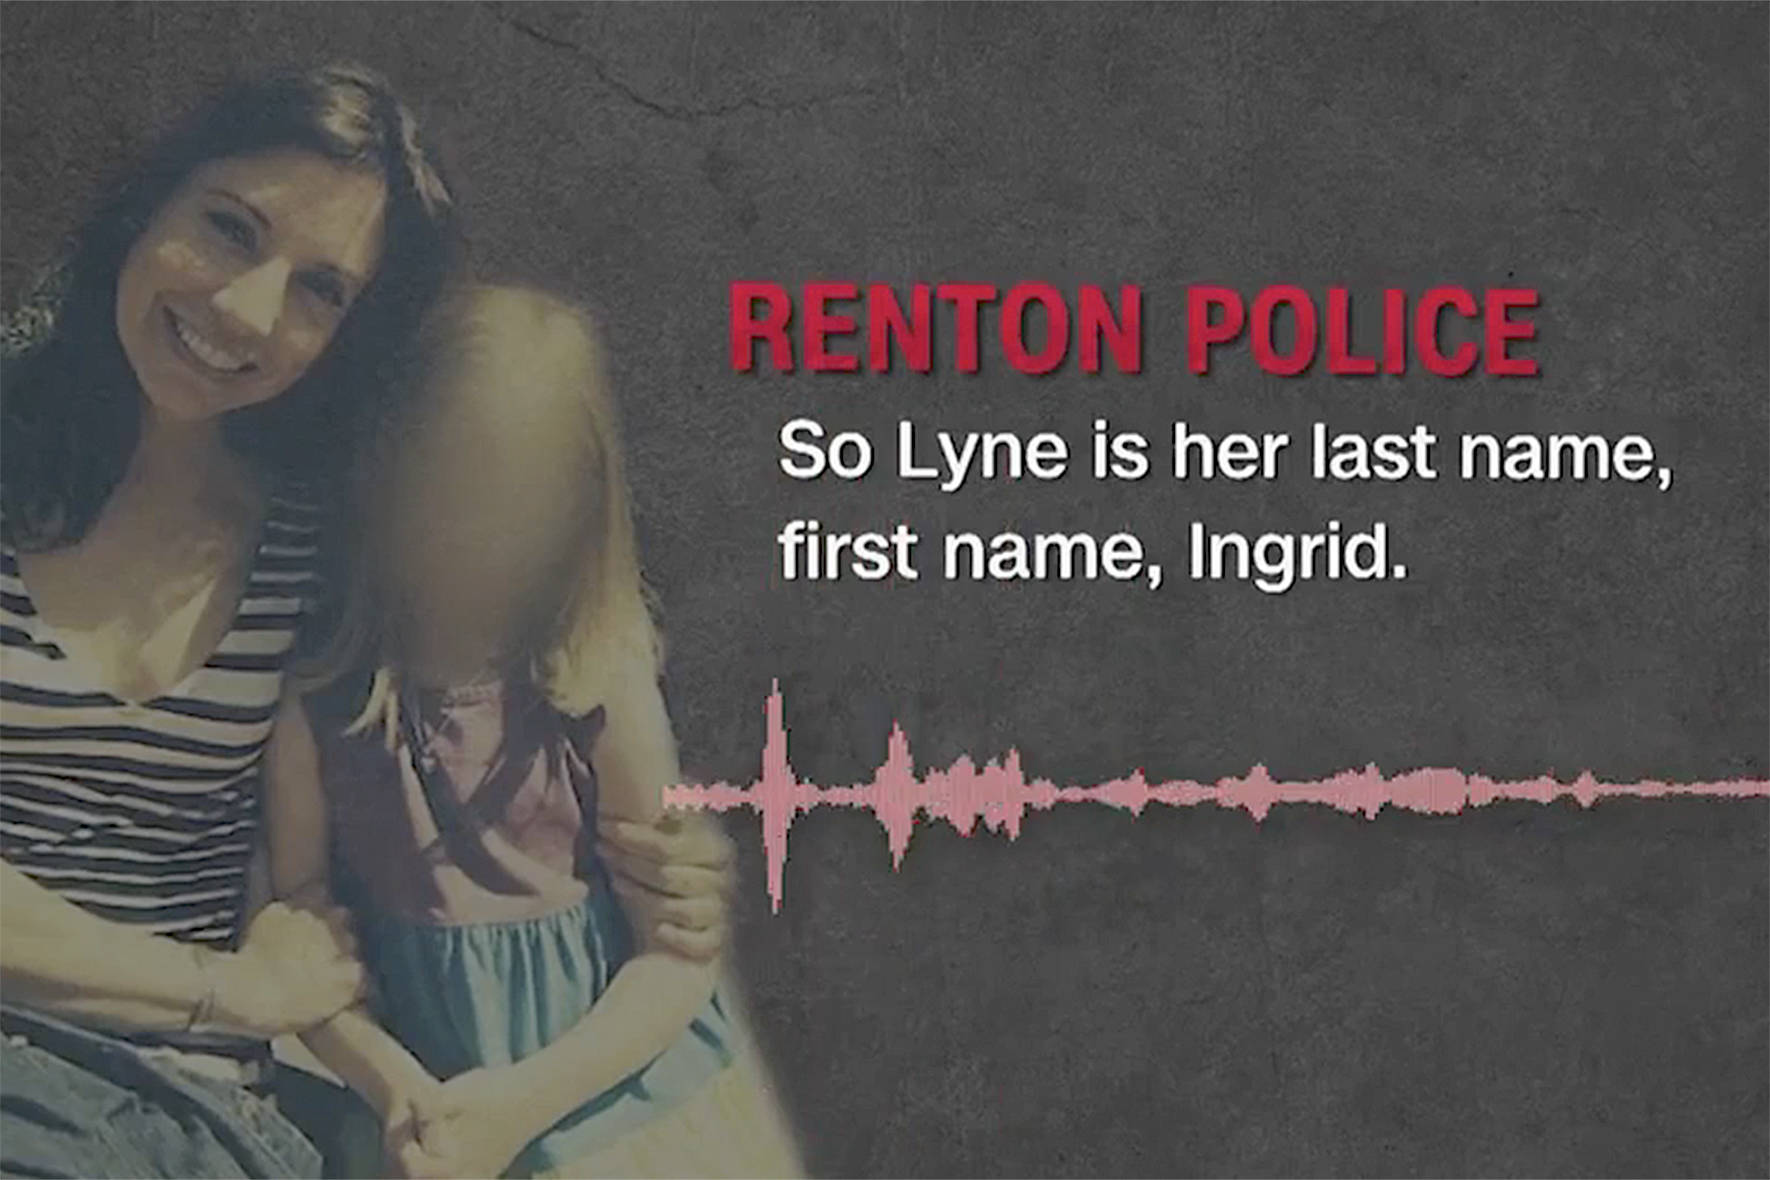 Courtesy of HLN. A screenshot from a preview of an episode of a new true crime show that highlights the Ingrid Lyne case, where a Renton mother was murdered.